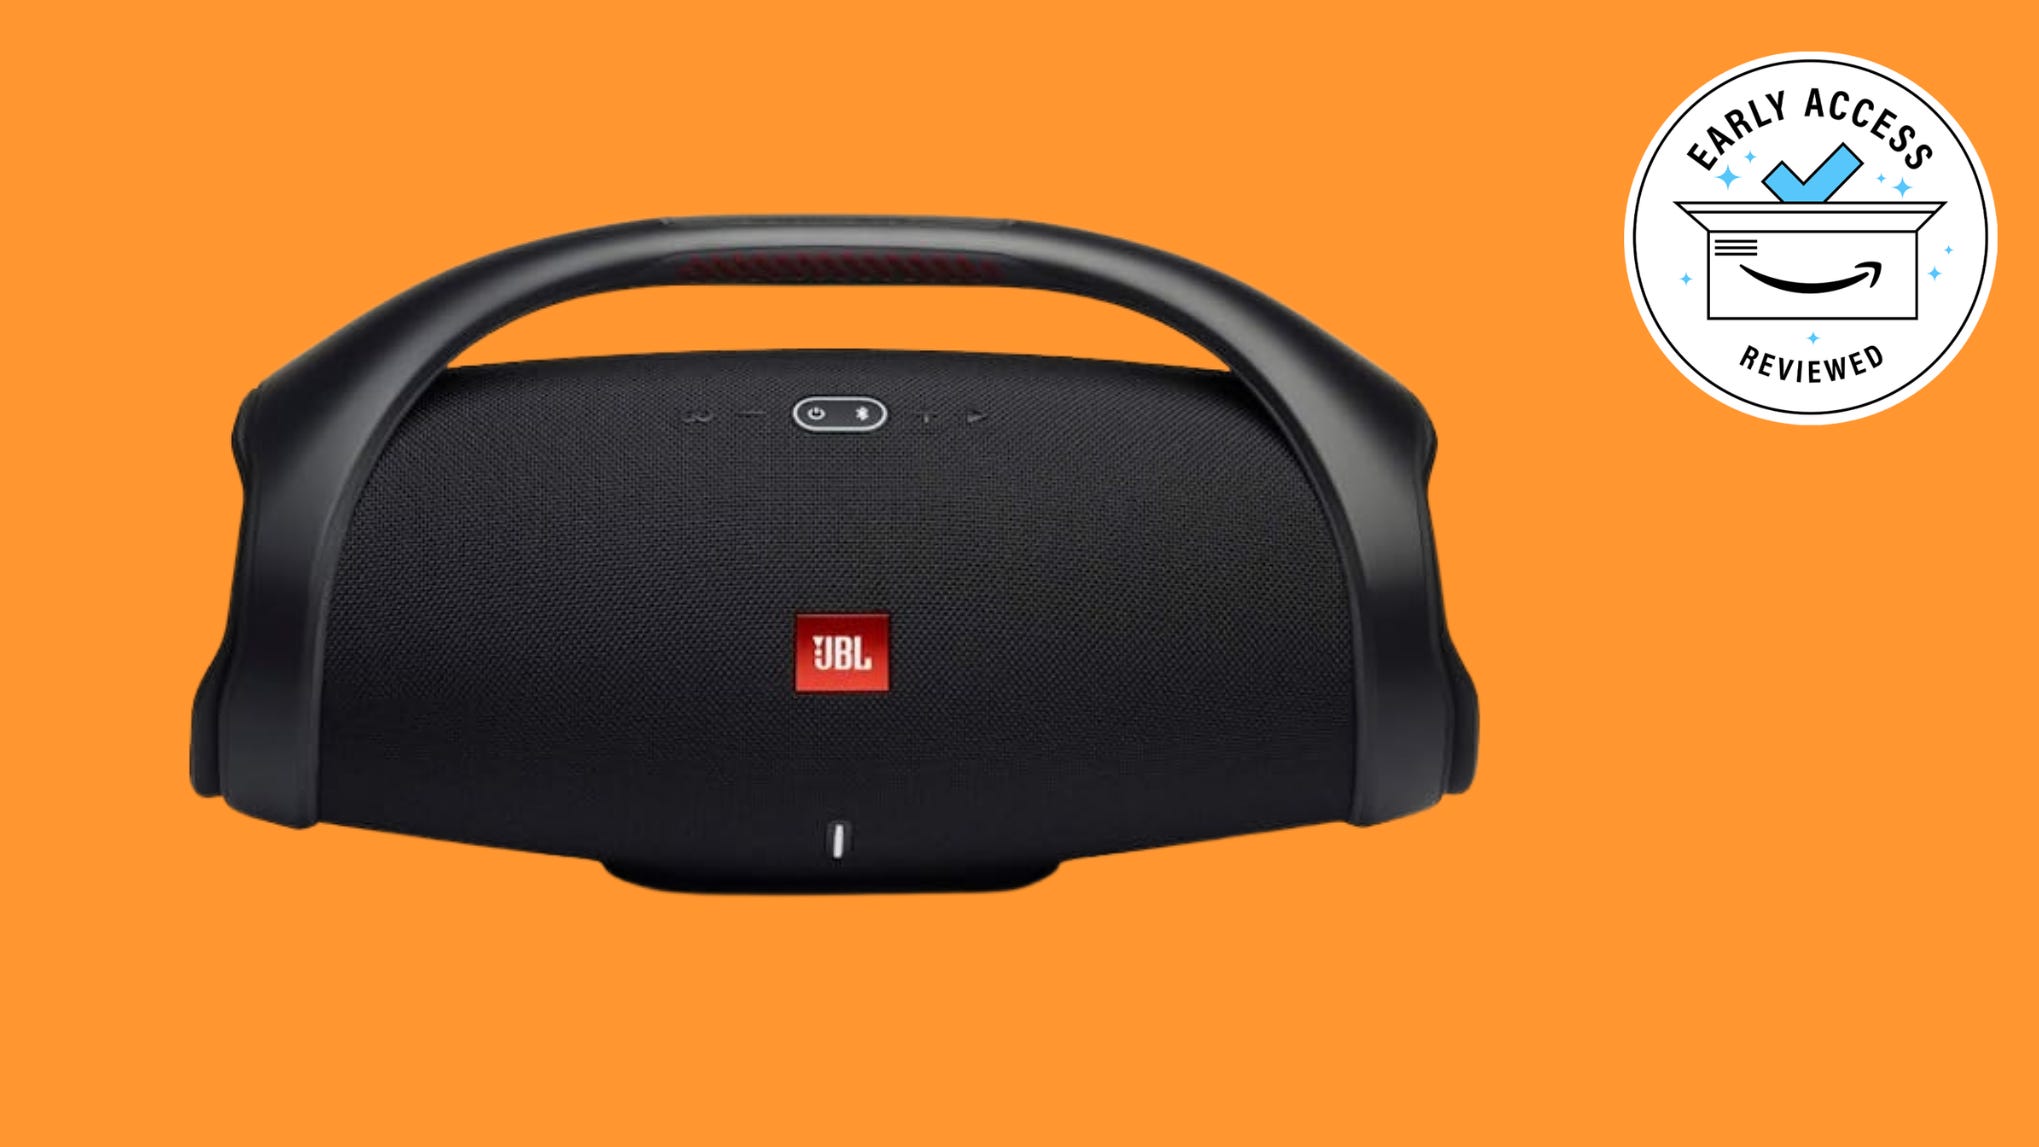 Amazon Prime Day speaker deals: Up to 32% off JBL speakers at Amazon